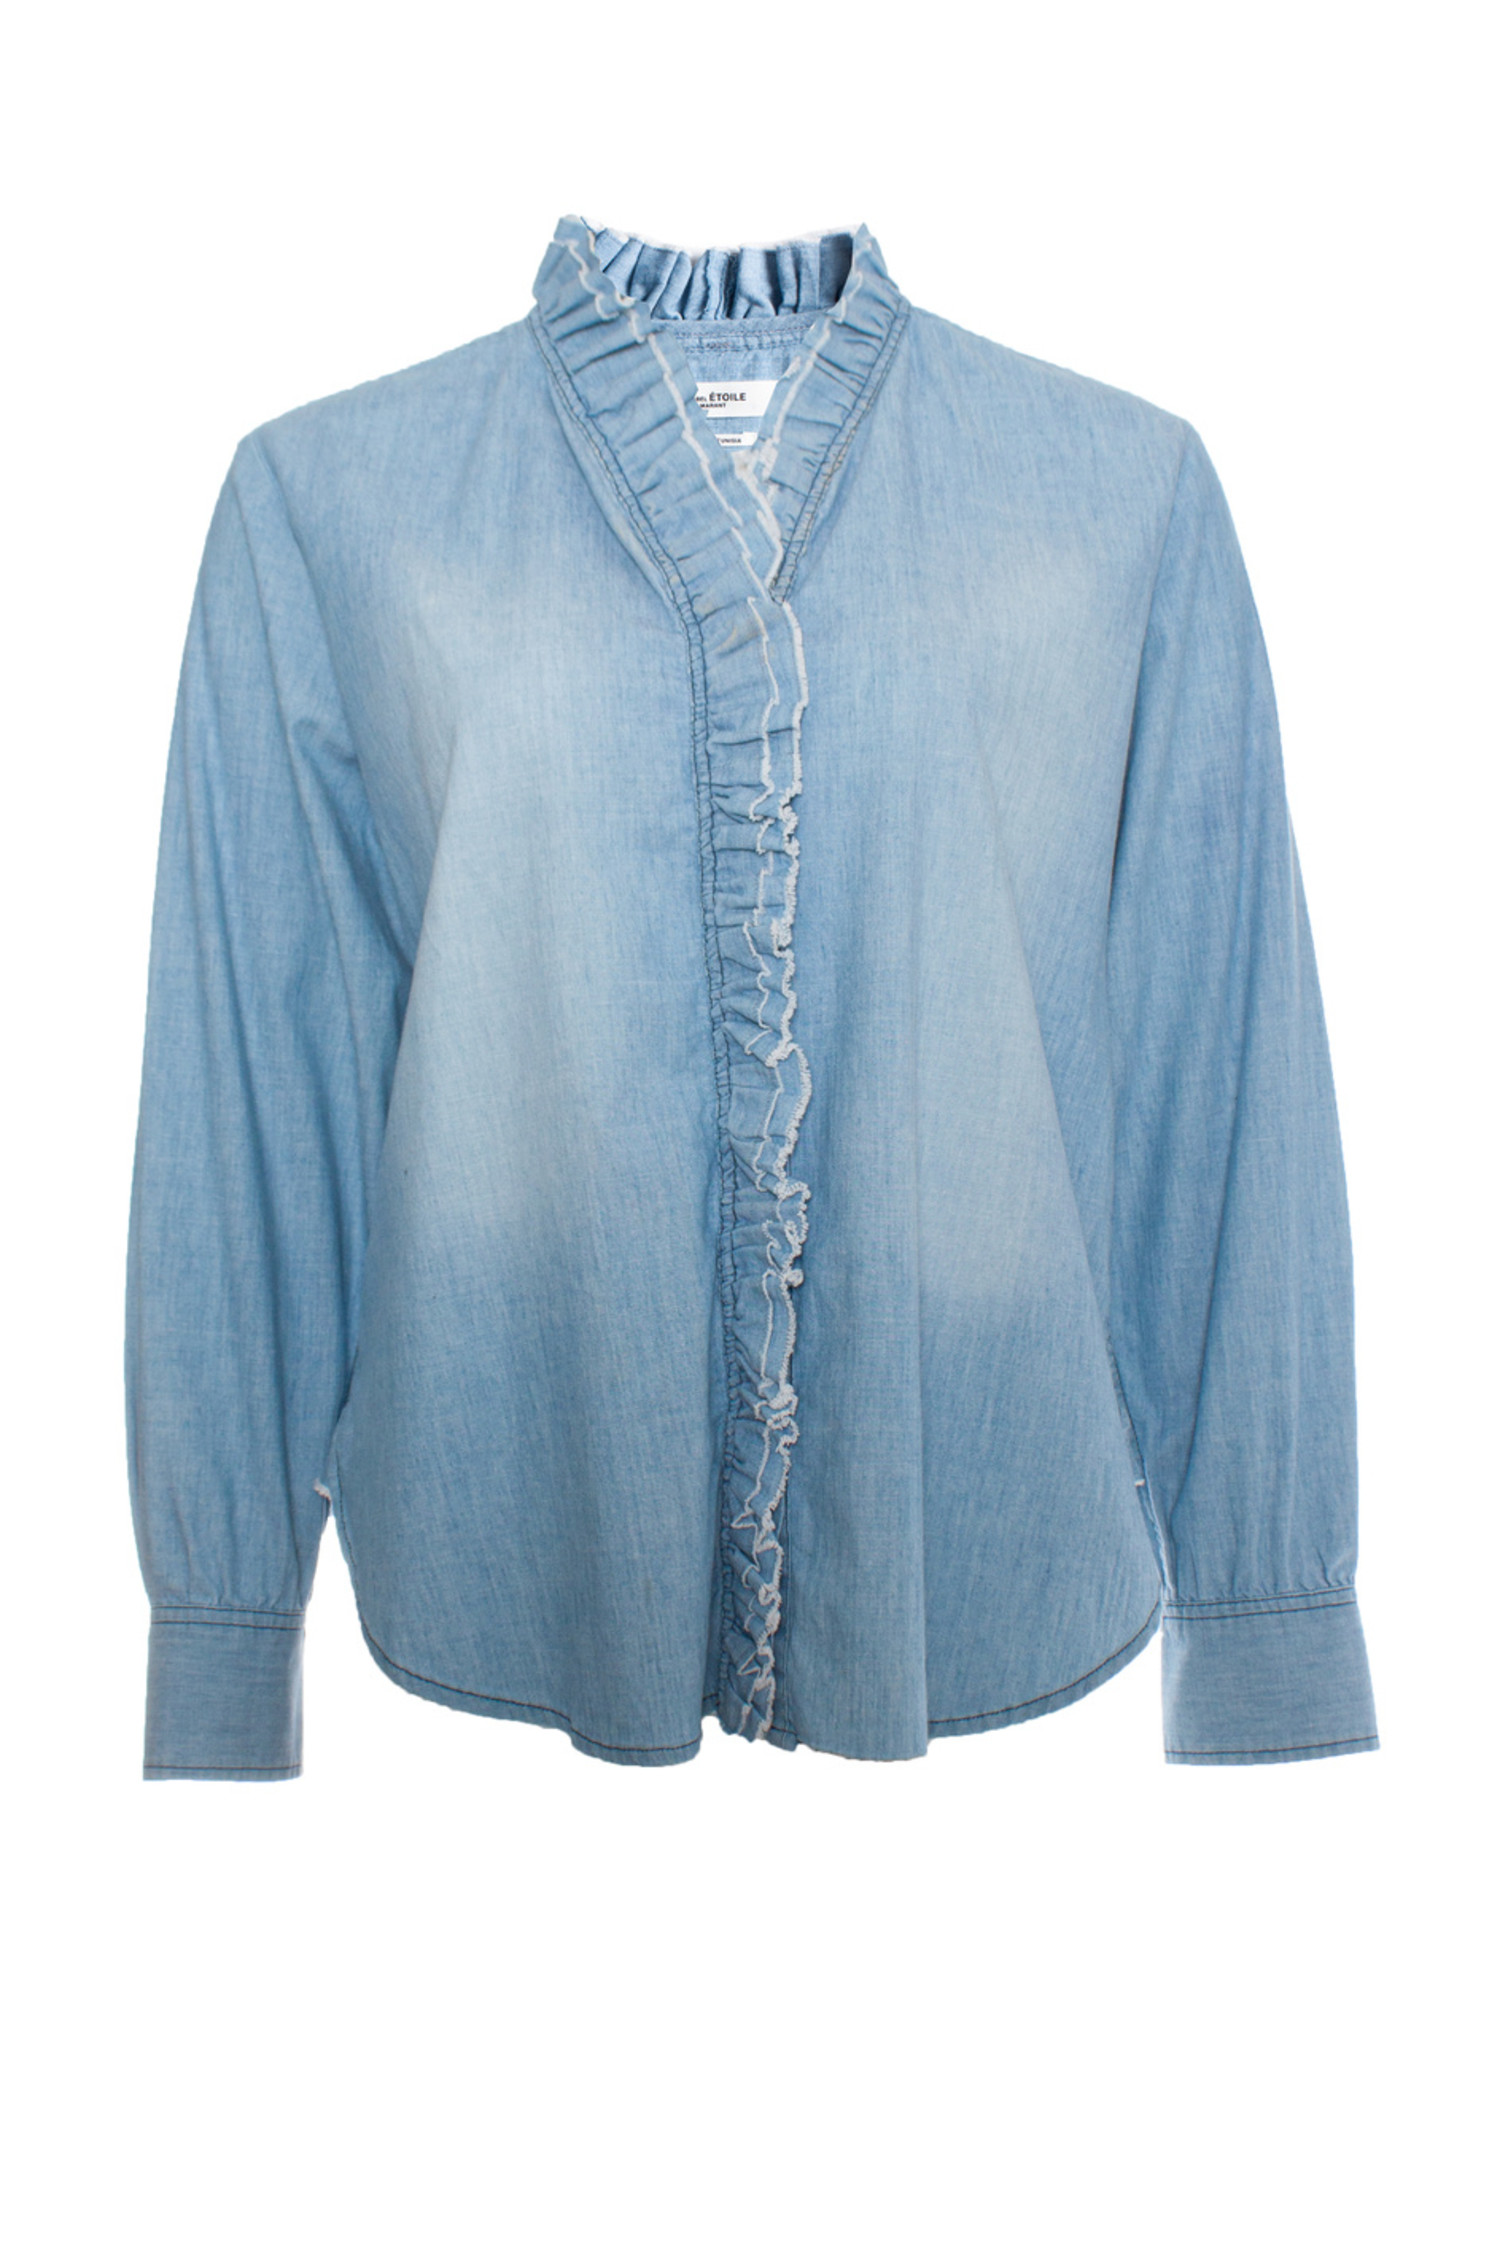 Forge tang tvetydigheden Isabel Marant Etoile, denim shirt with ruffles. - Unique Designer Pieces